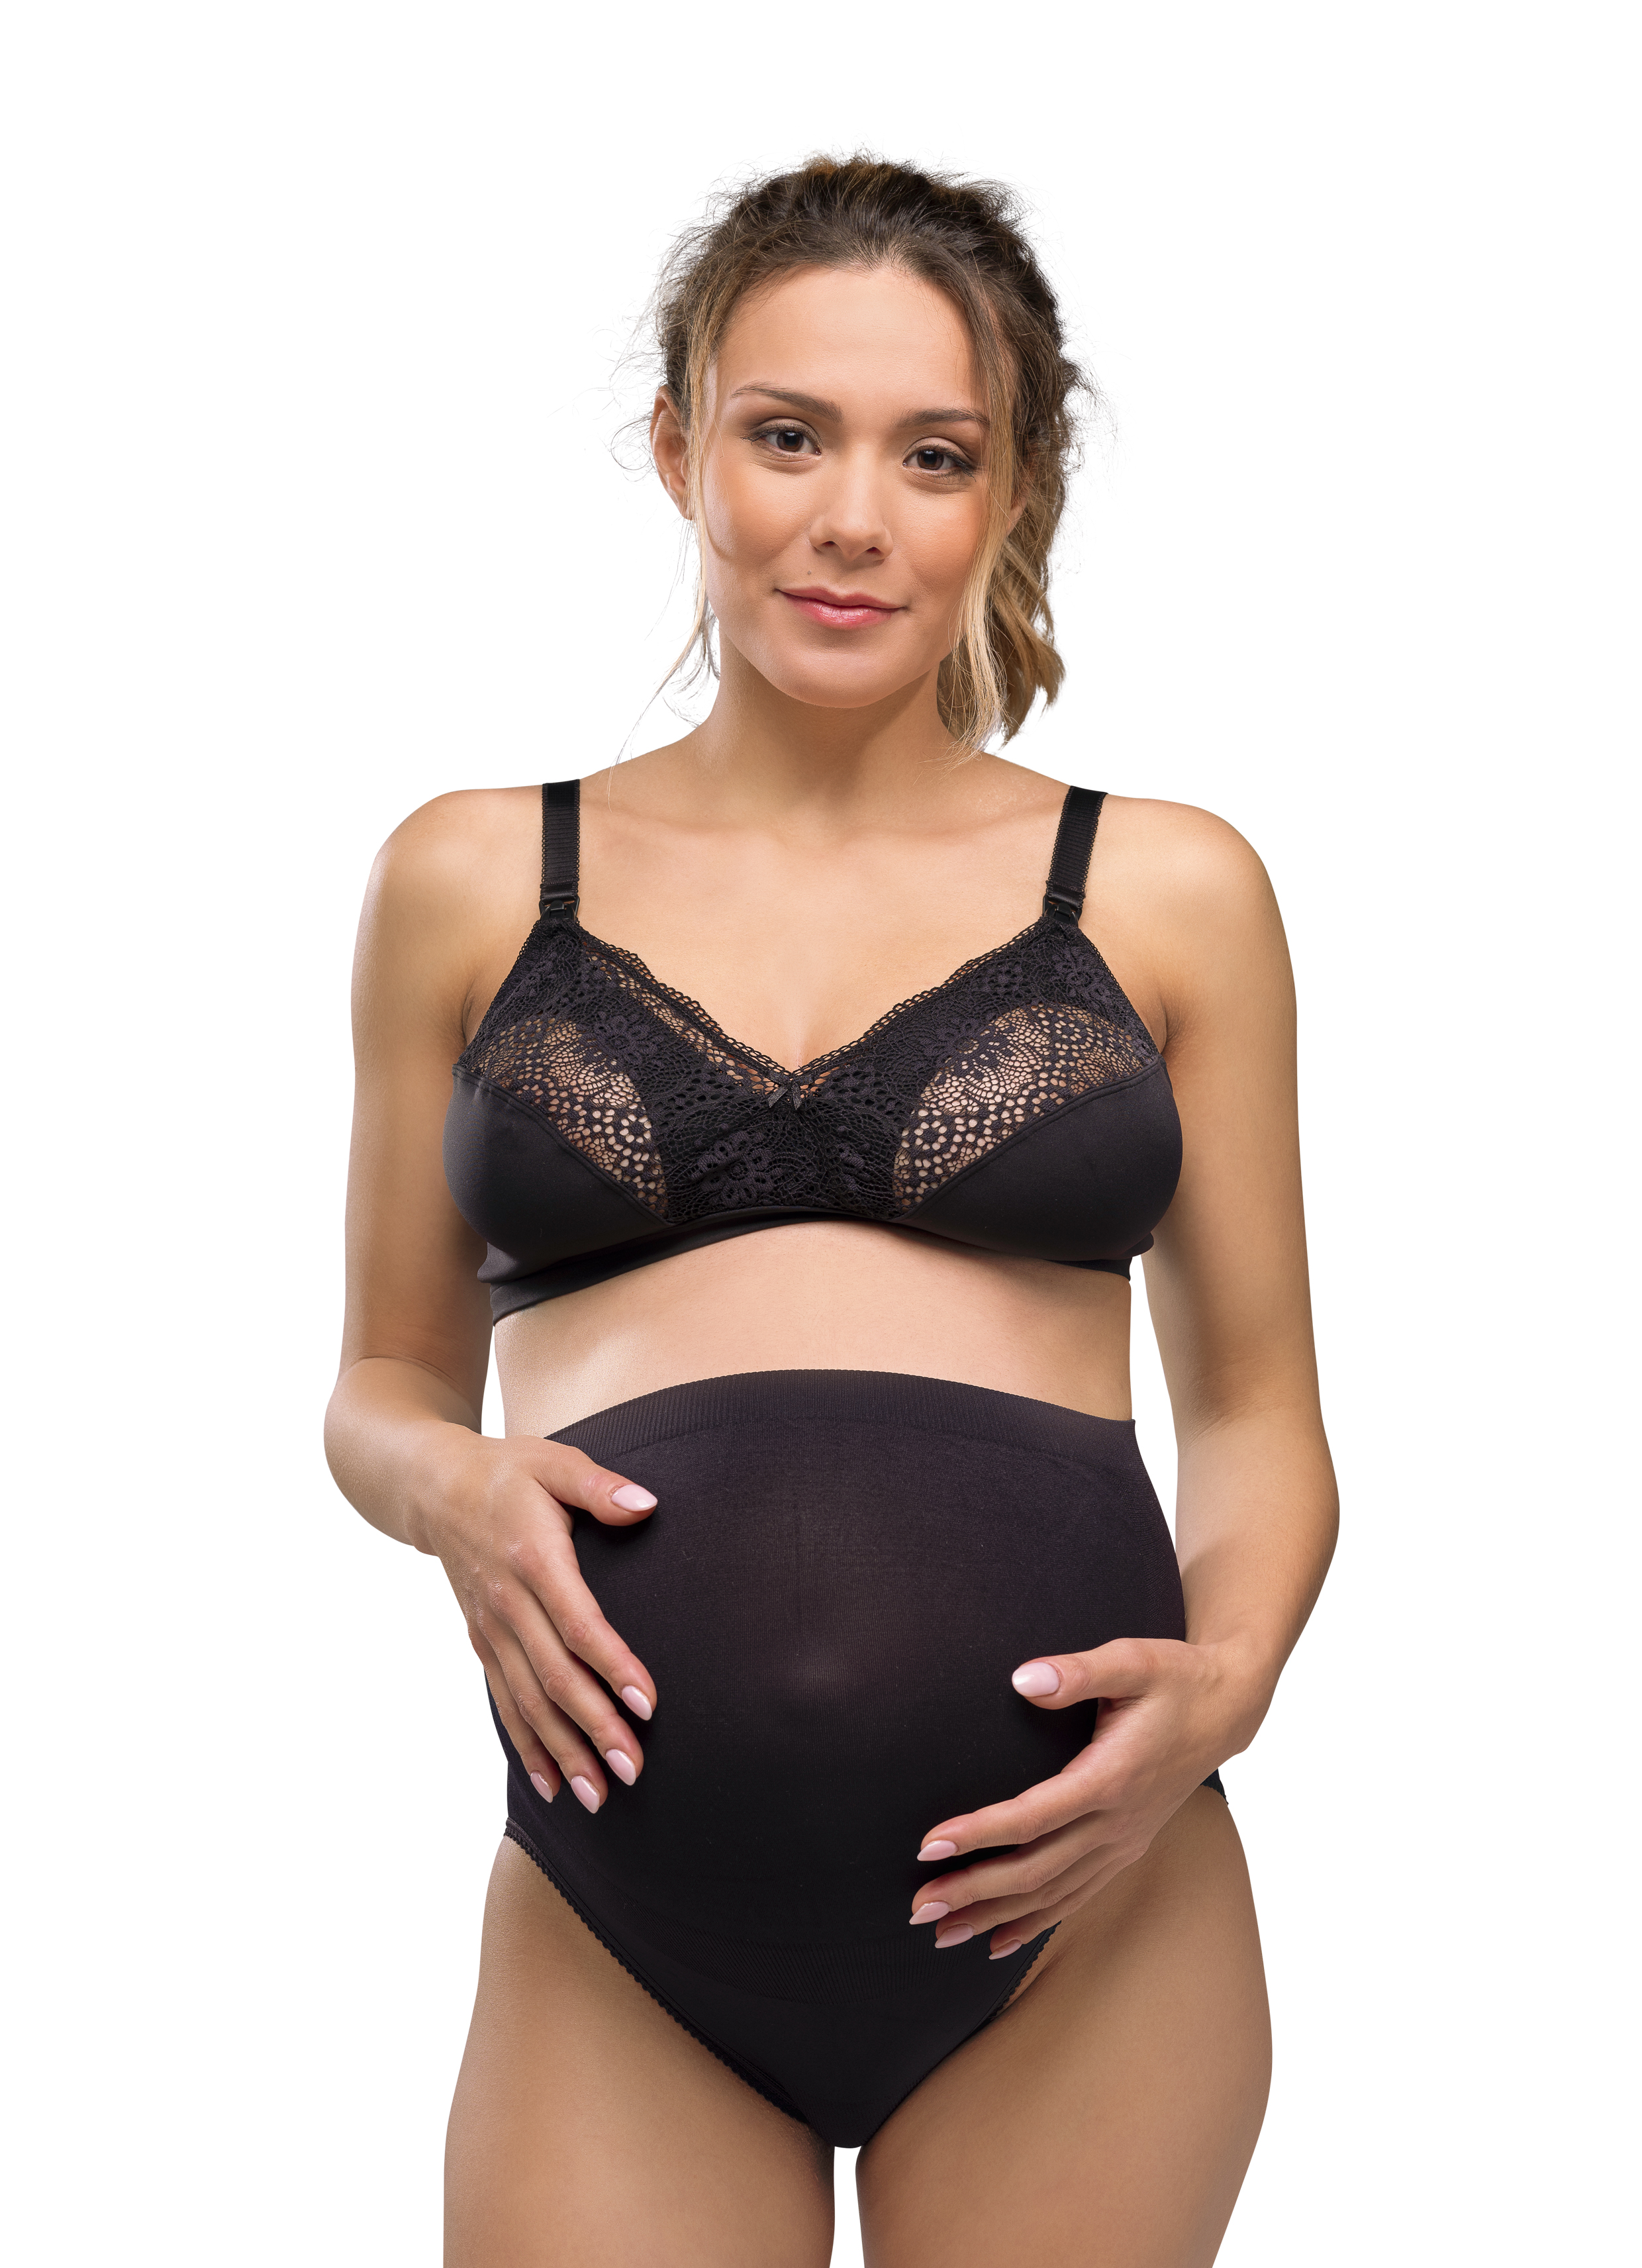 Carriwell Maternity Support Panty - MaMidea